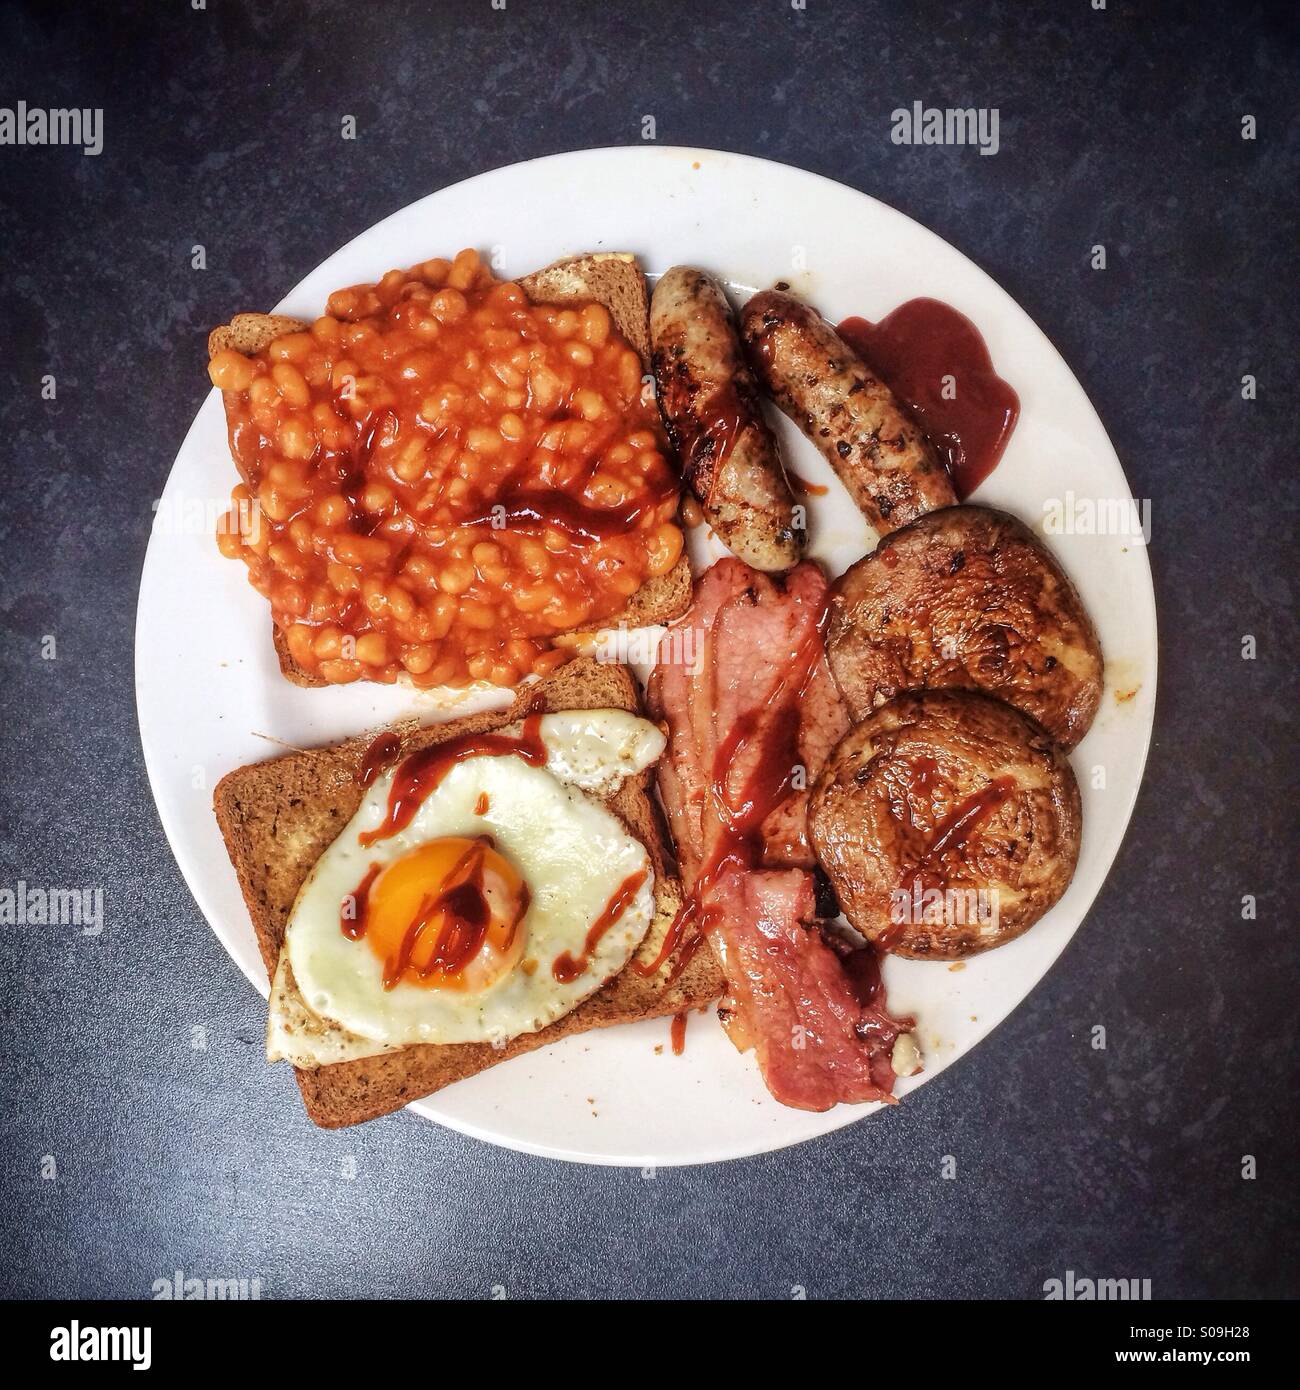 A full English breakfast of bacon, fried eggs, sausages, baked beans, toast and mushrooms with brown sauce on a white plate against a black background. Stock Photo